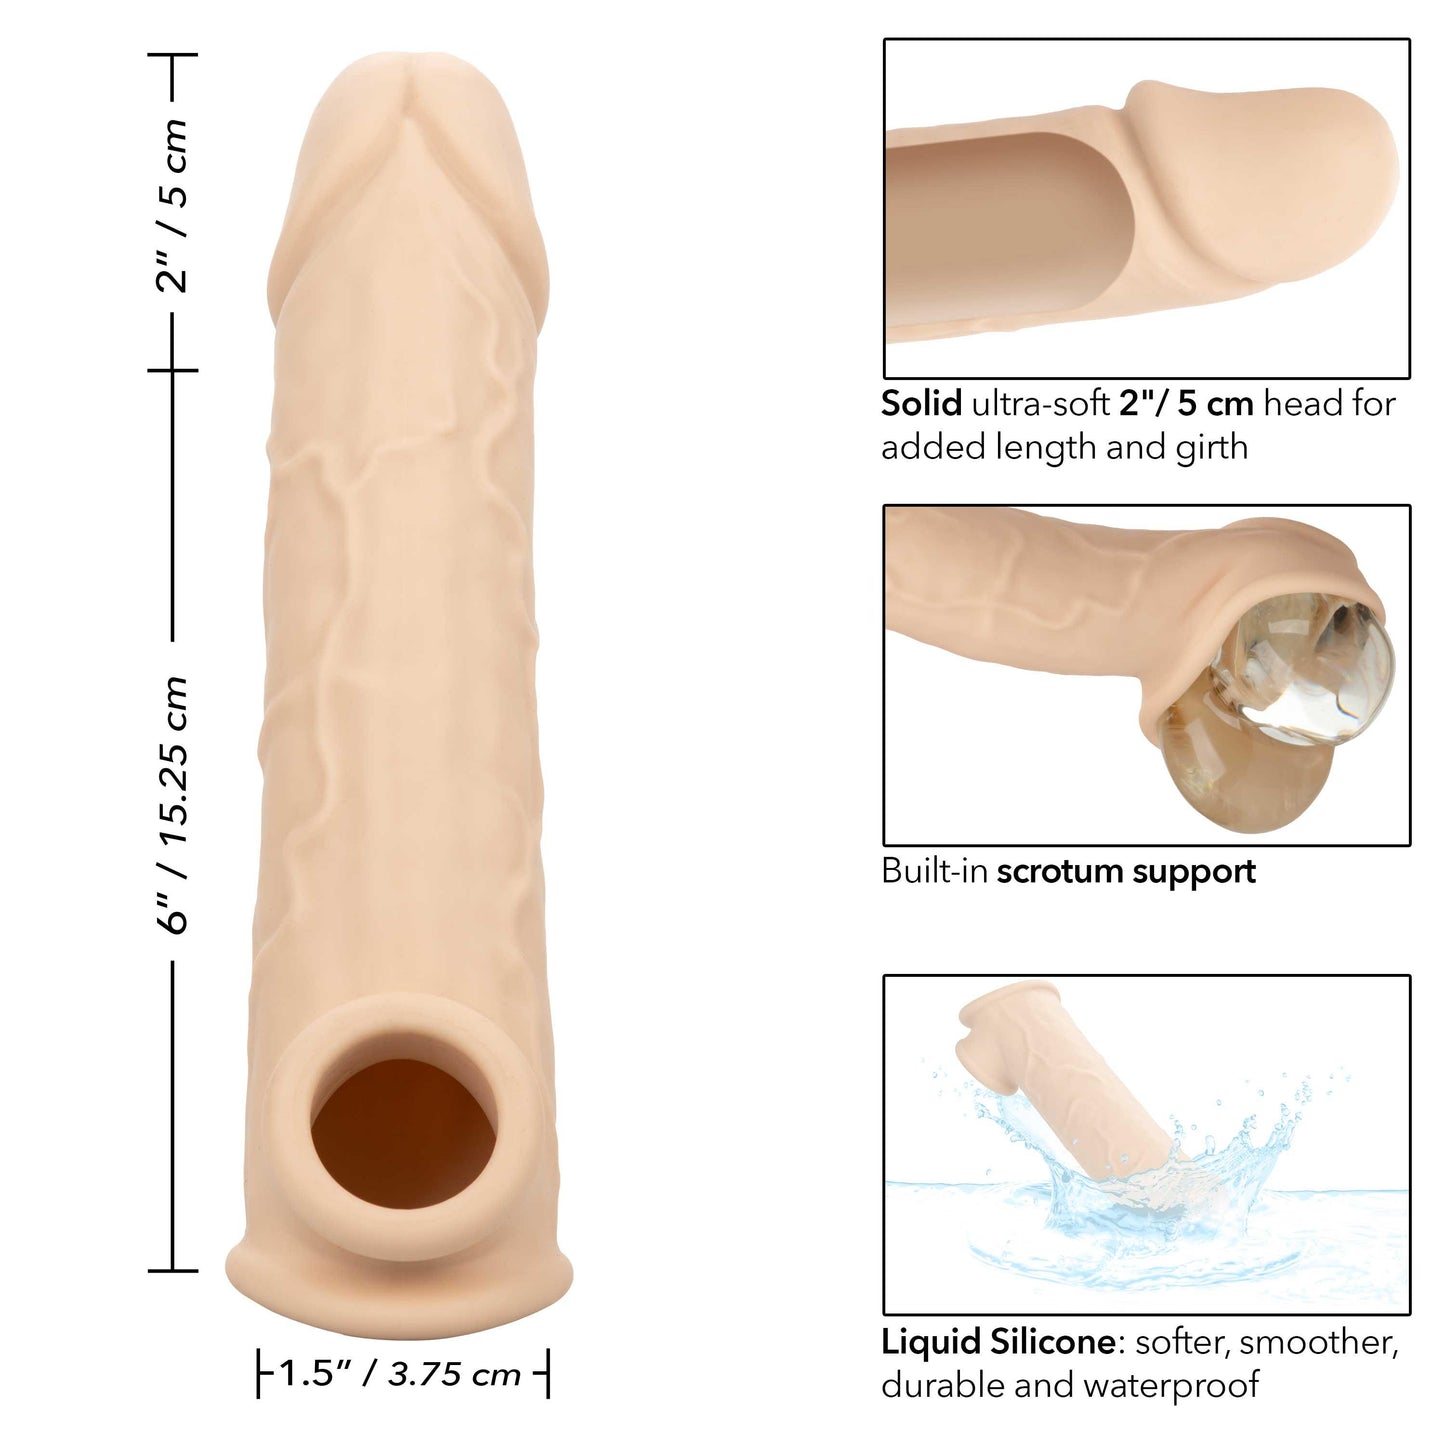 Performance Maxx Life-Like Extension 8 Inch - Ivory - My Sex Toy Hub